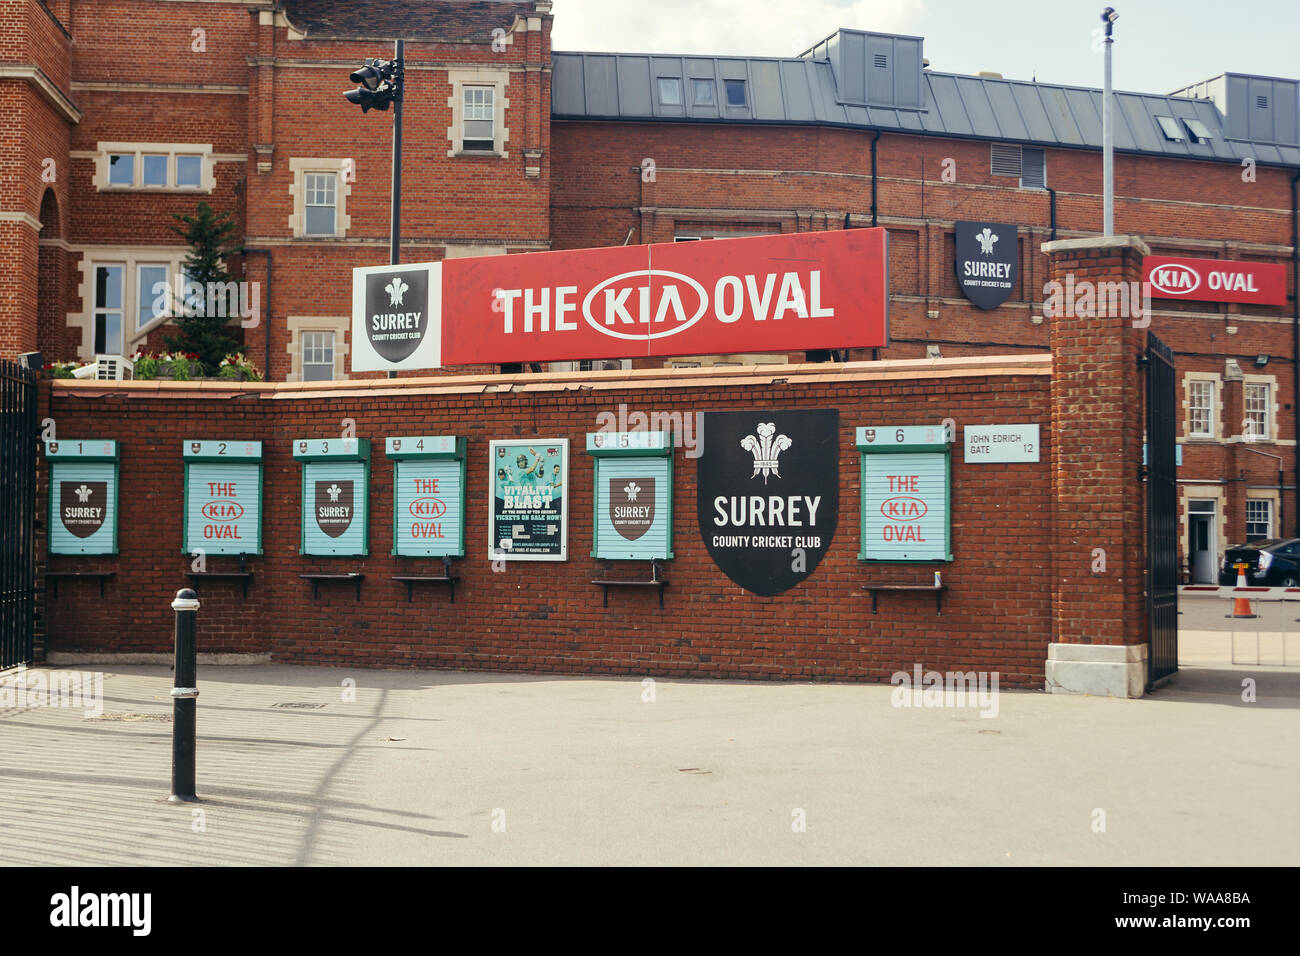 London / UK - July 16, 2019: The Oval, international cricket ground in Kennington in south London. It has been the home ground of Surrey County Cricke Stock Photo